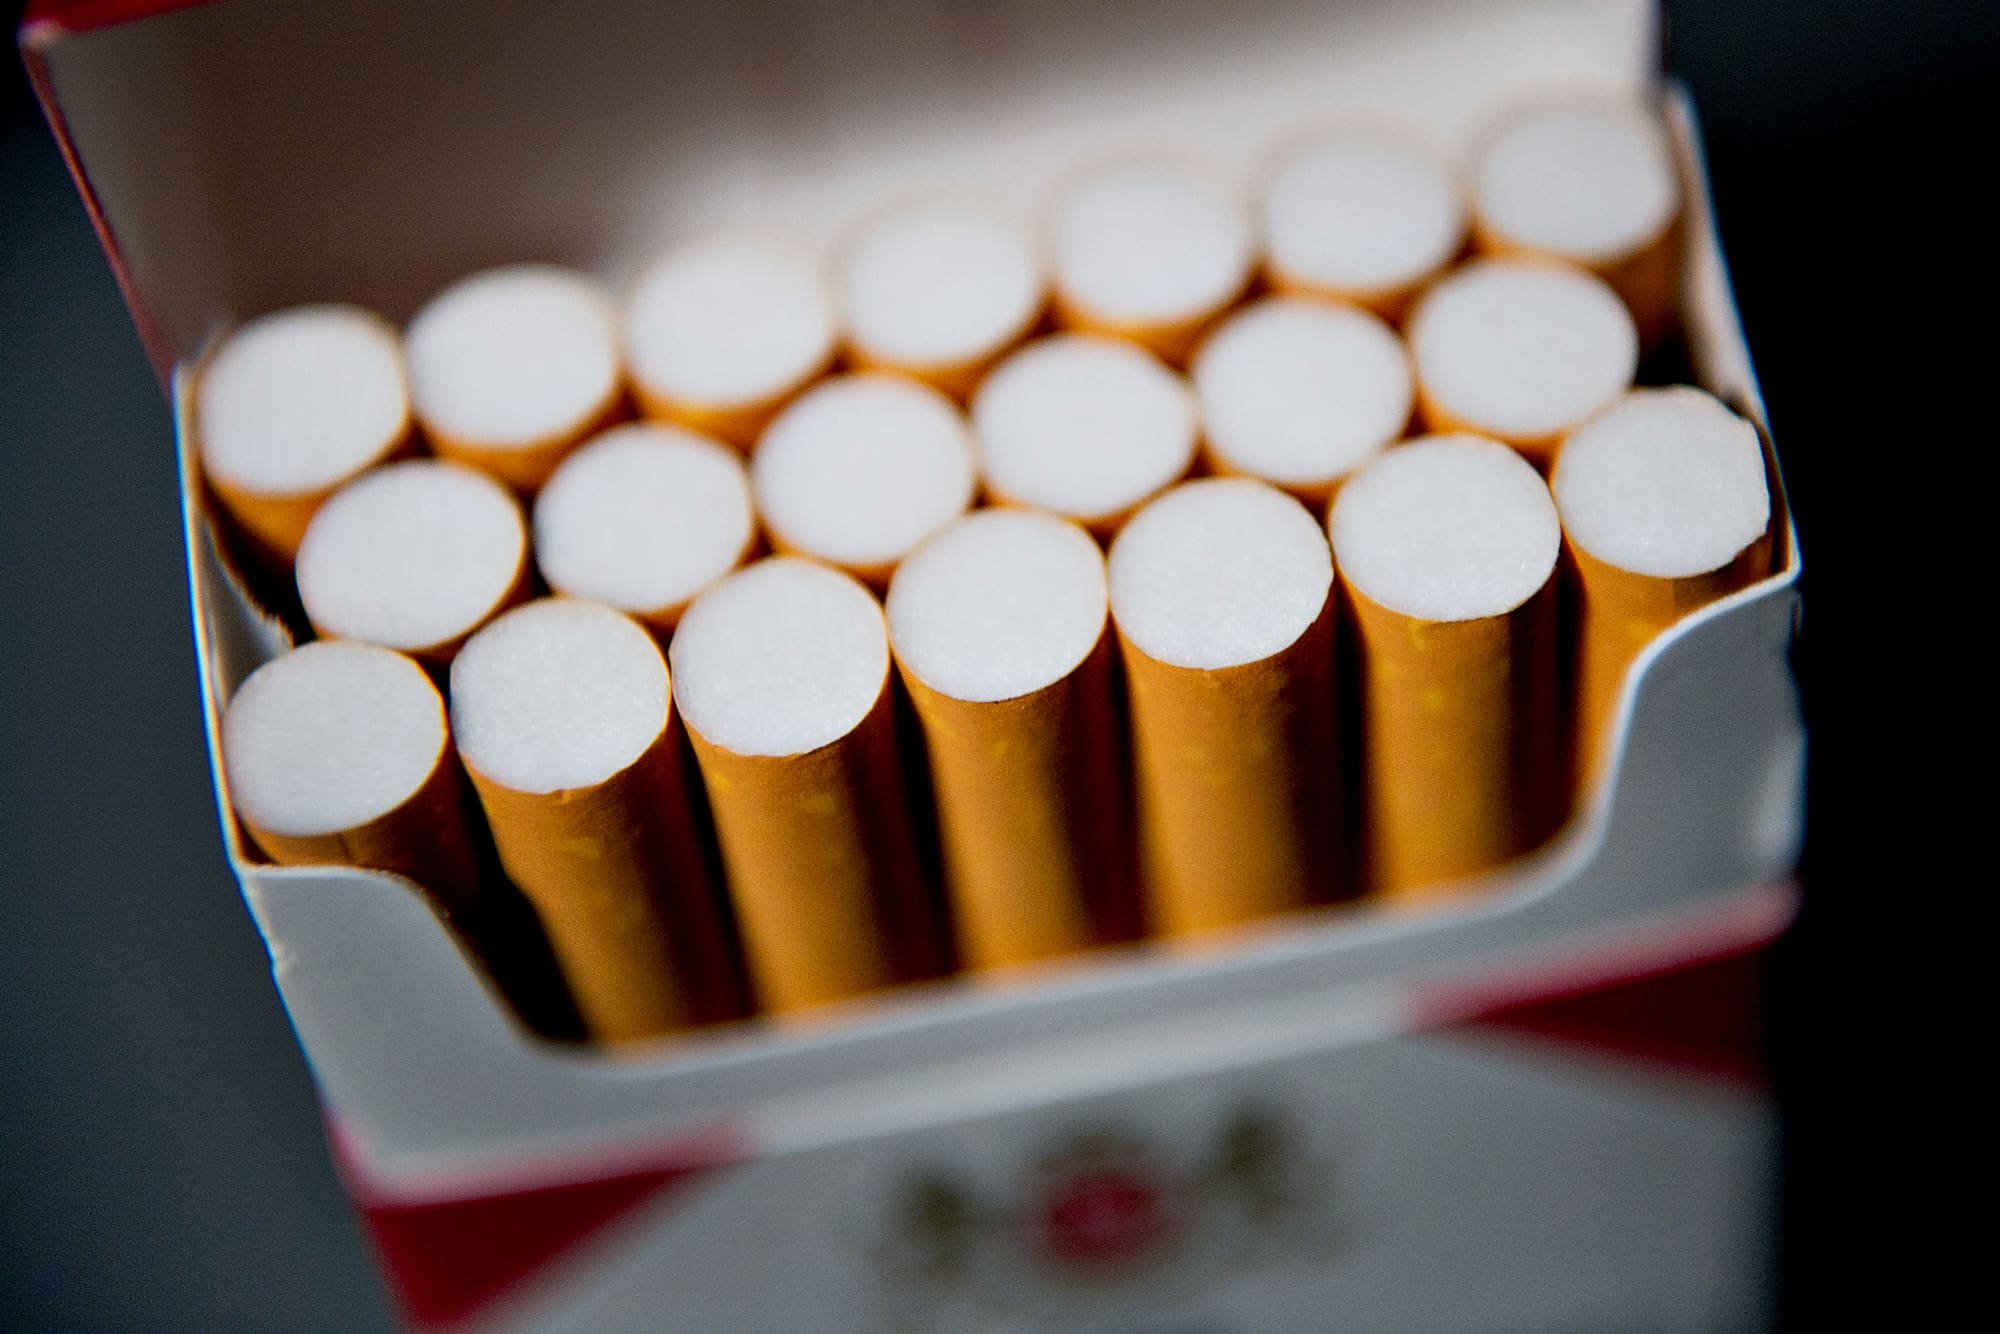 Tobacco stocks drop on report Biden administration is planning to cut nicotine levels in cigarettes